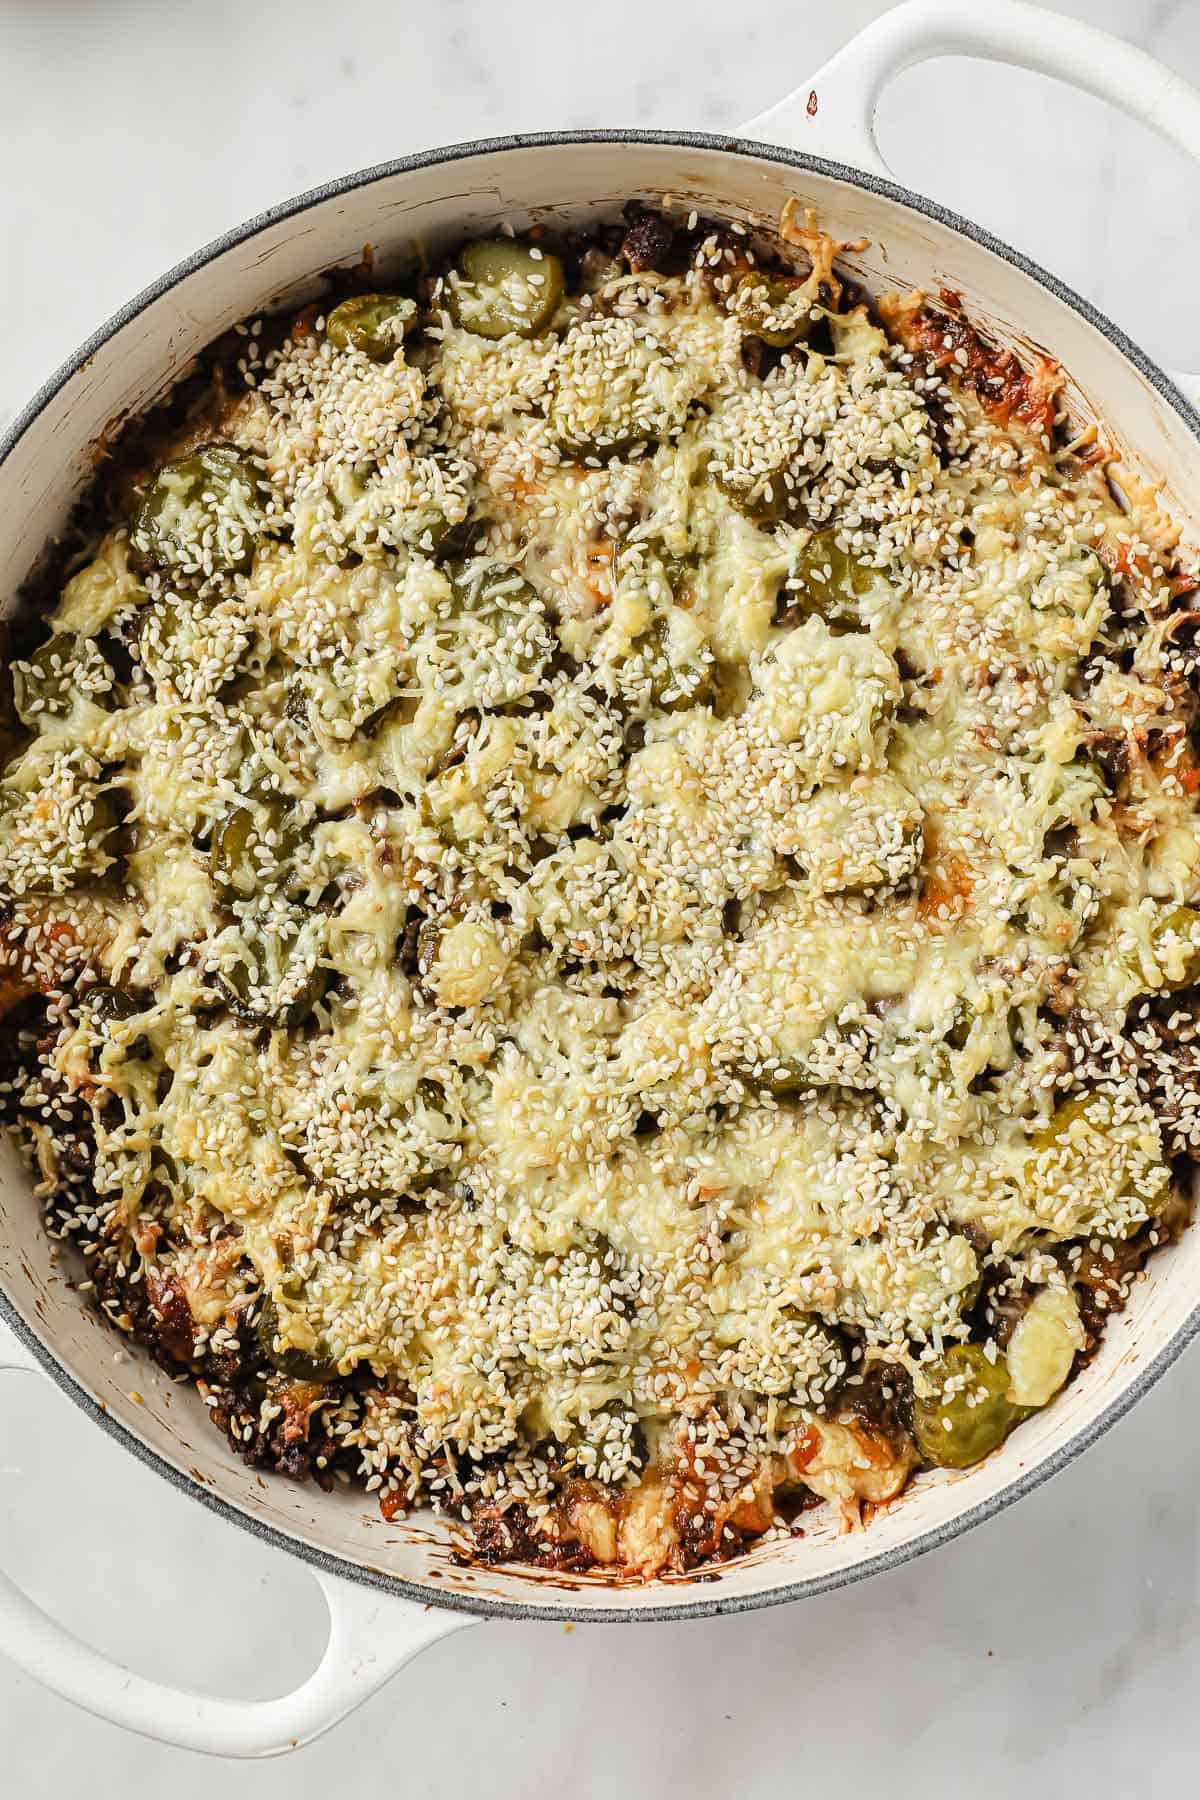 a cast iron pan, full of a casserole made with ground beef, burger sauce, cheese, pickles, onions and sesame seeds